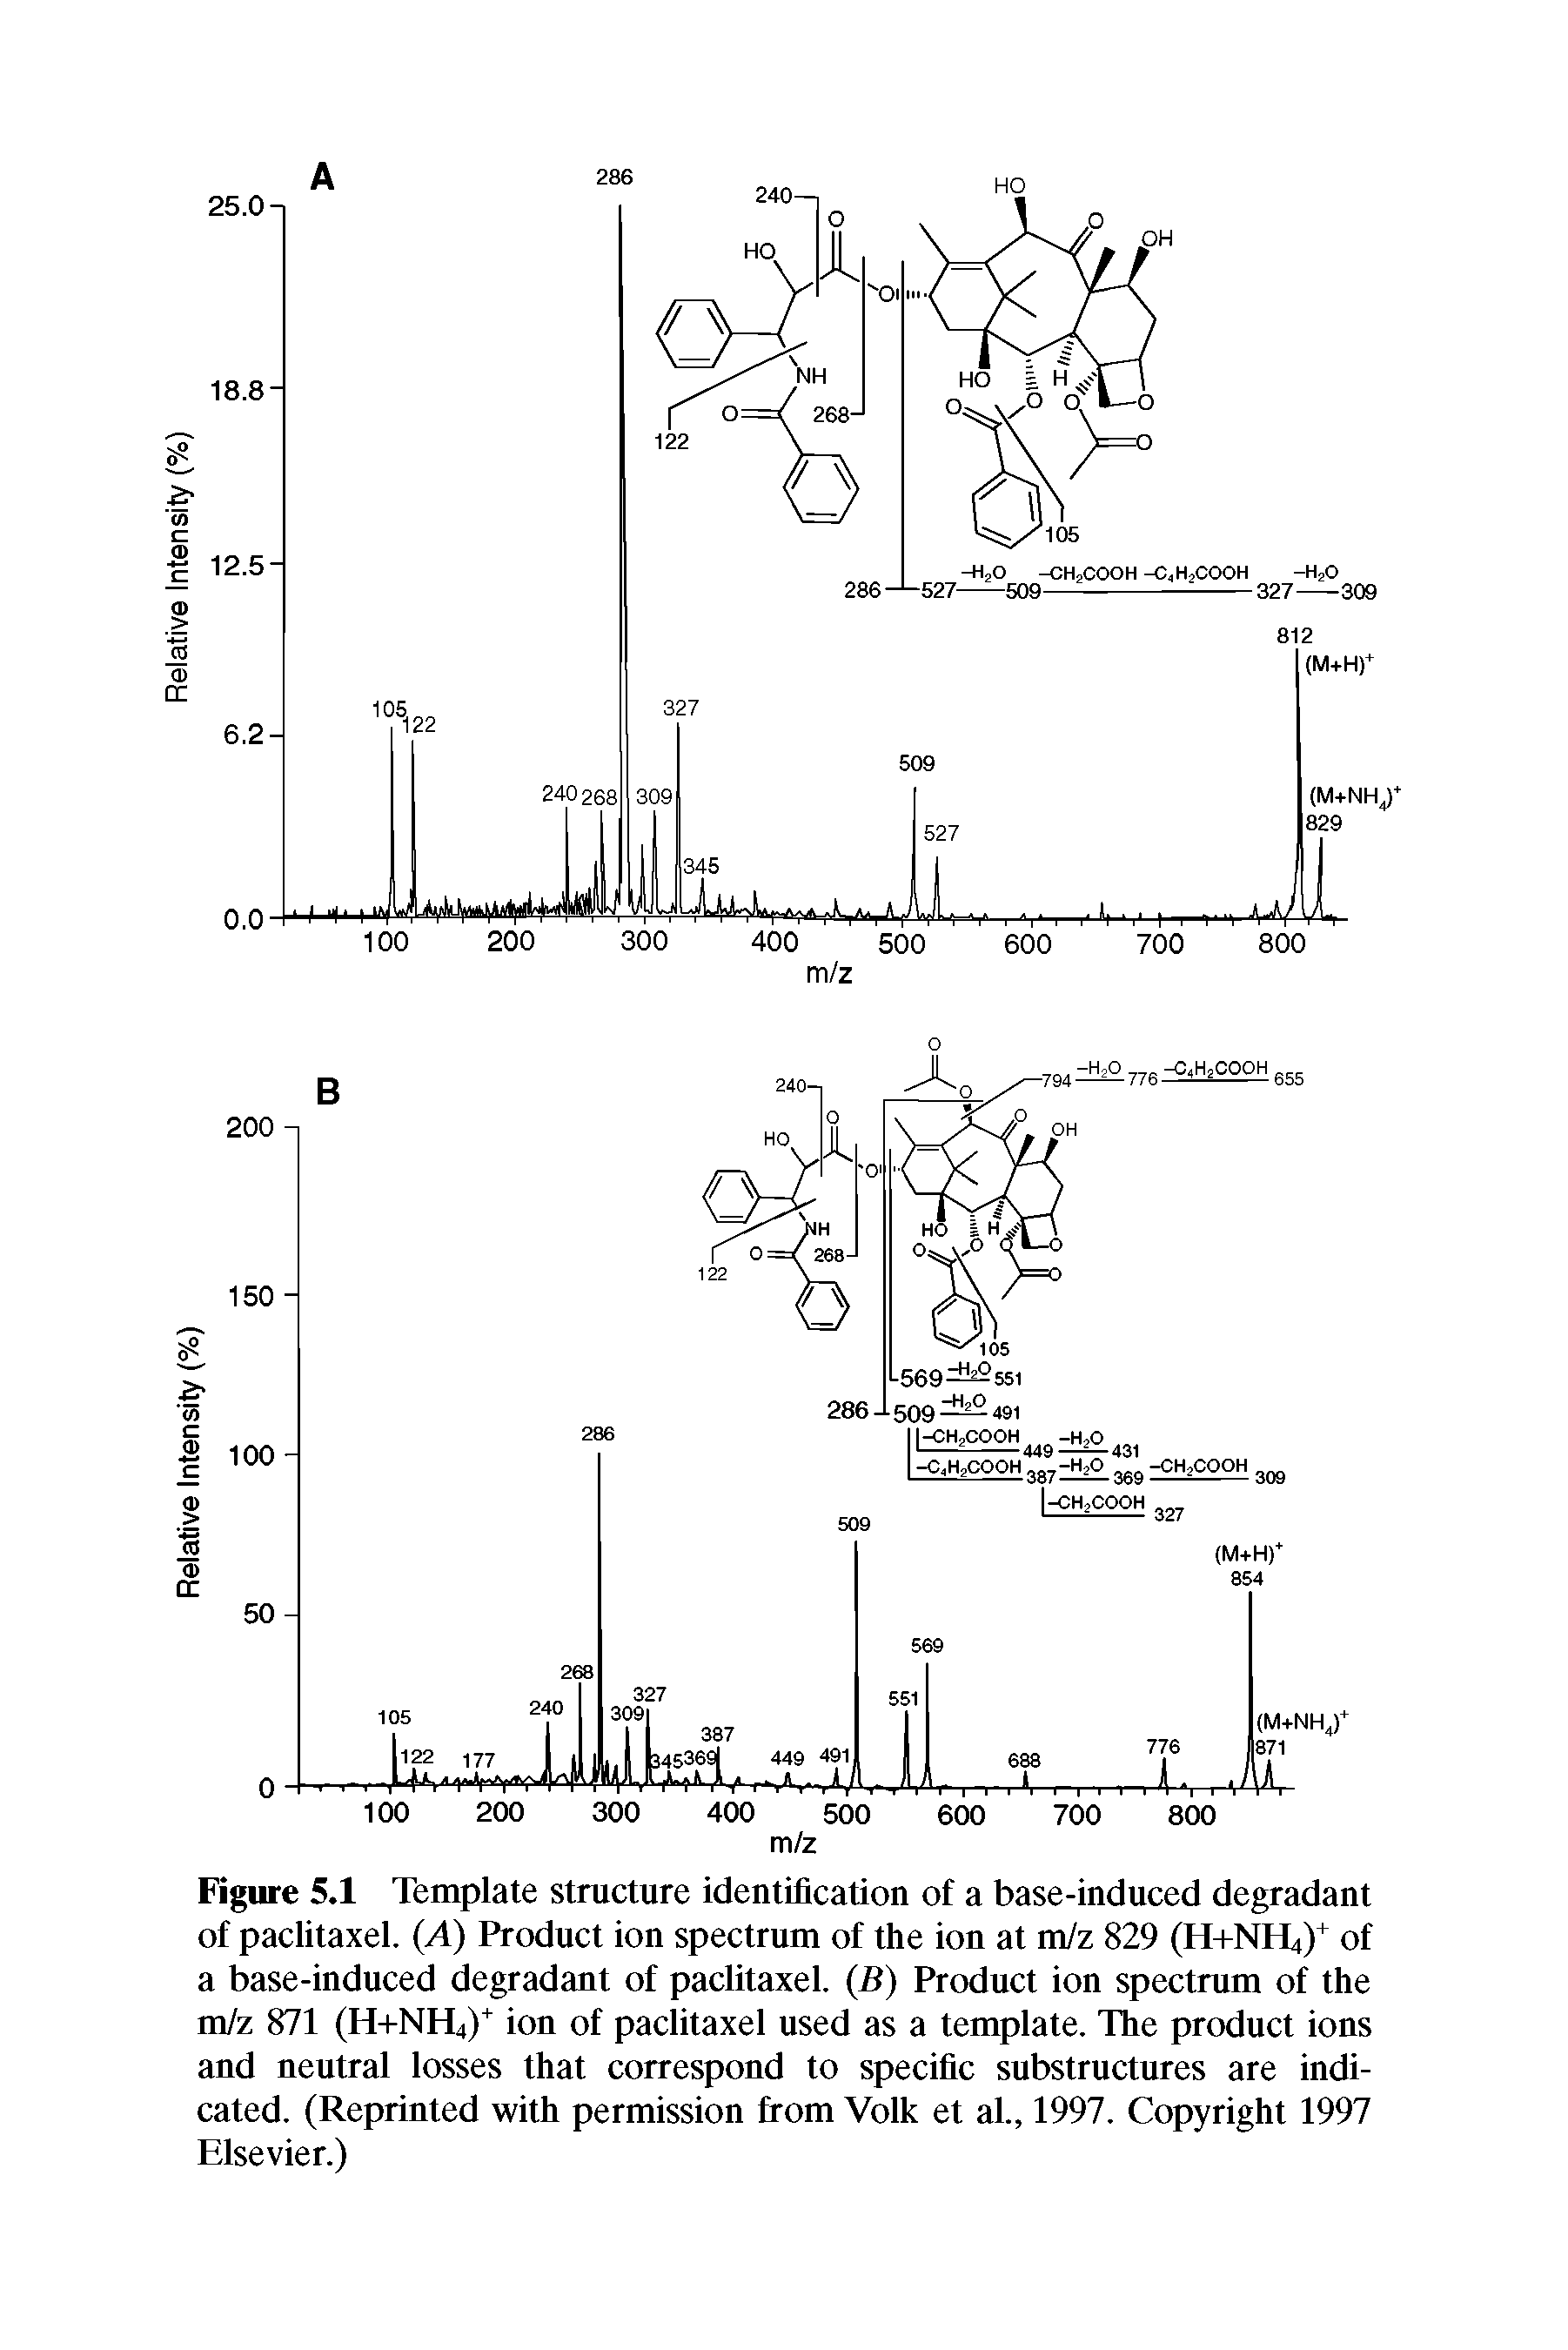 Figure 5.1 Template structure identification of a base-induced degradant of paclitaxel. (A) Product ion spectrum of the ion at m/z 829 (H+NH4)+ of a base-induced degradant of paclitaxel. (B) Product ion spectrum of the m/z 871 (H+NH4)+ ion of paclitaxel used as a template. The product ions and neutral losses that correspond to specific substructures are indicated. (Reprinted with permission from Volk et al., 1997. Copyright 1997 Elsevier.)...